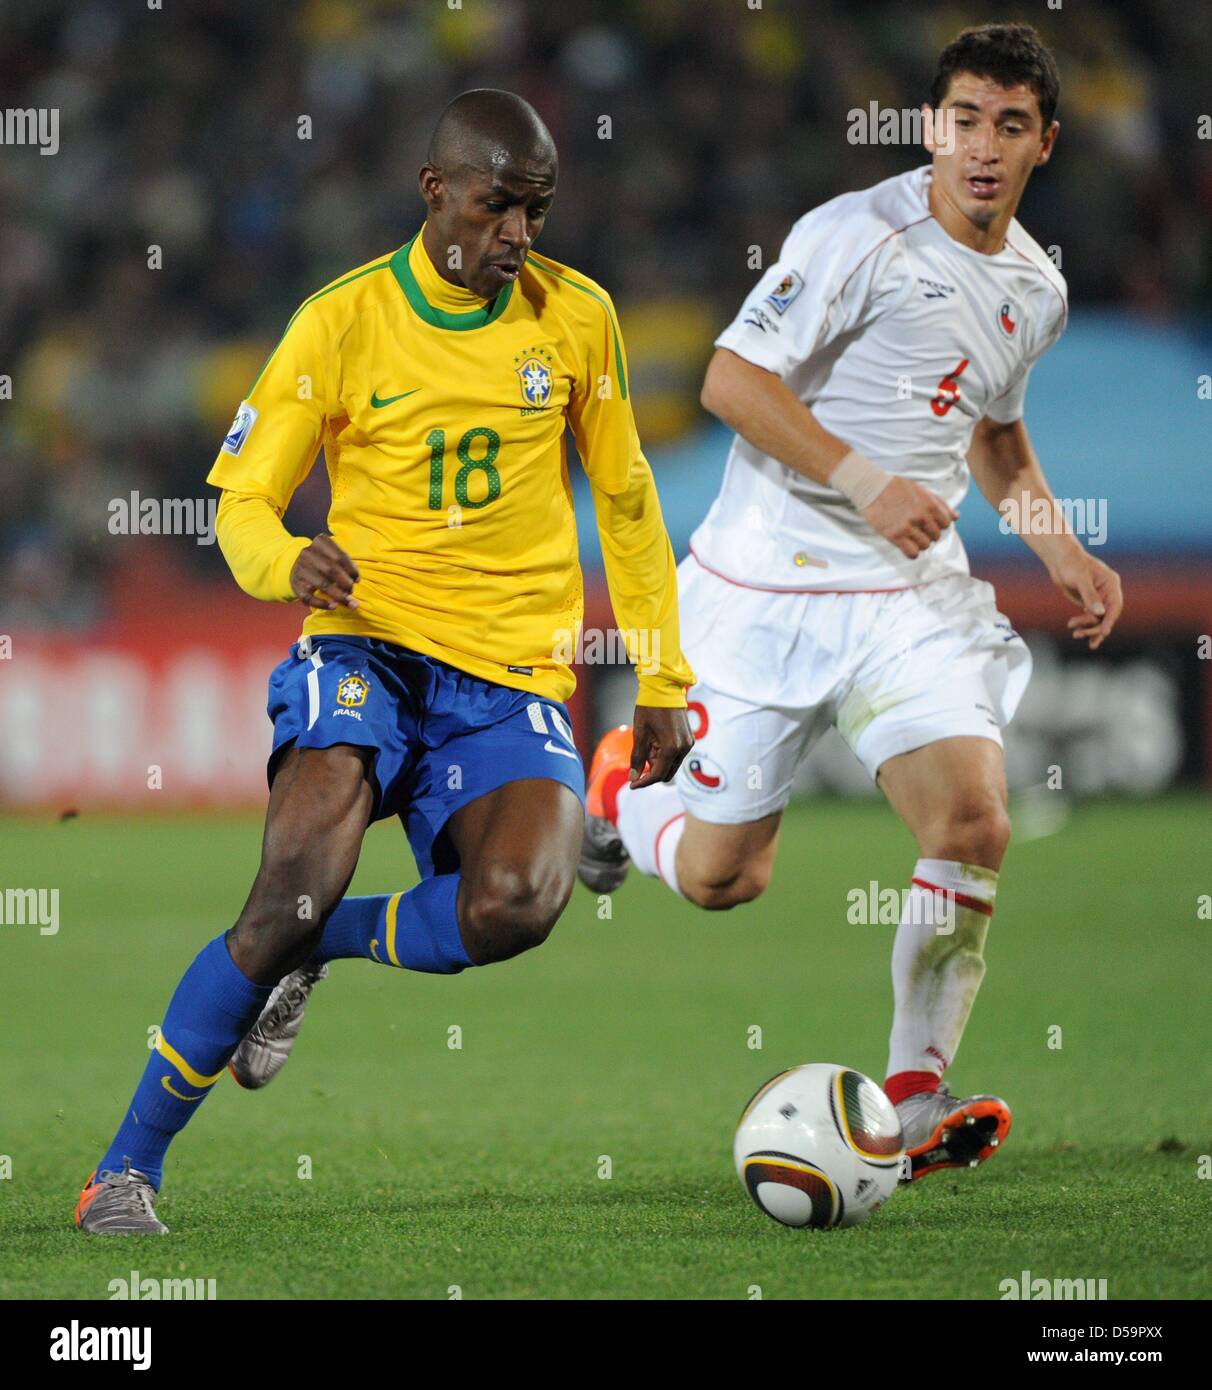 Brazil's Ramires (L) vies for the ball with Chile's Carlos Carmona during the 2010 FIFA World Cup Round of Sixteen match between Brazil and Chile at the Ellis Park Stadium in Johannesburg, South Africa 28 June 2010. Photo: Marcus Brandt dpa - Please refer to http://dpaq.de/FIFA-WM2010-TC Stock Photo